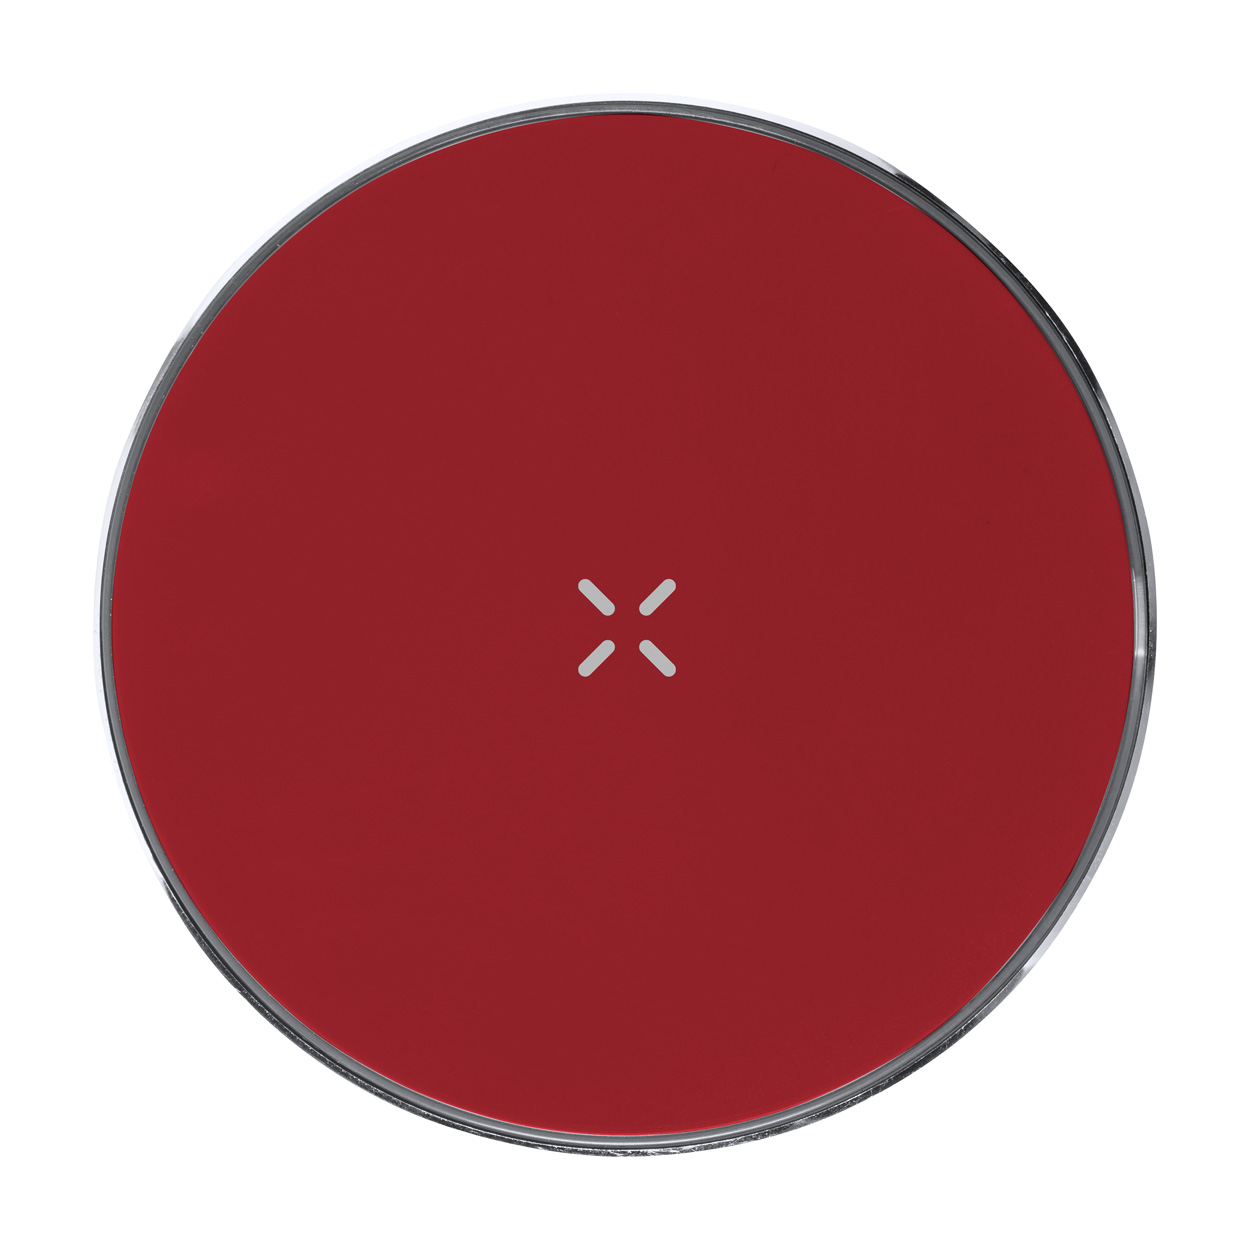 Golop wireless charger - red